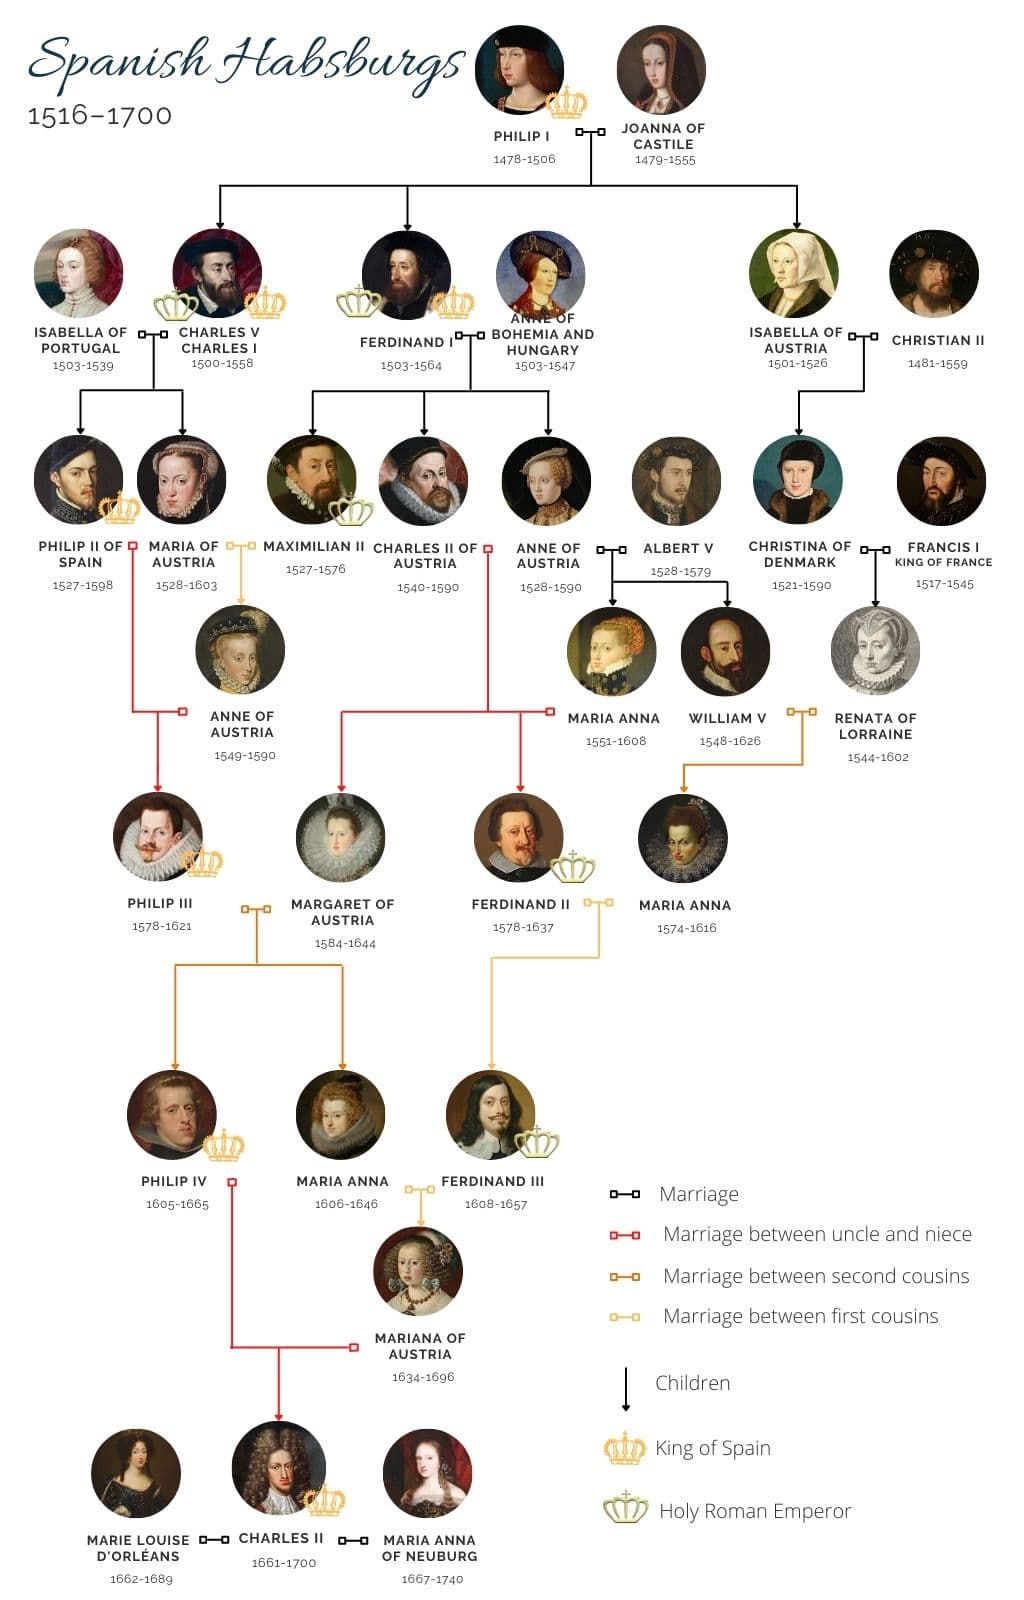 The Spanish Habsburg family tree shows the uncle-niece and cousin marriages that would lead to their extinction.